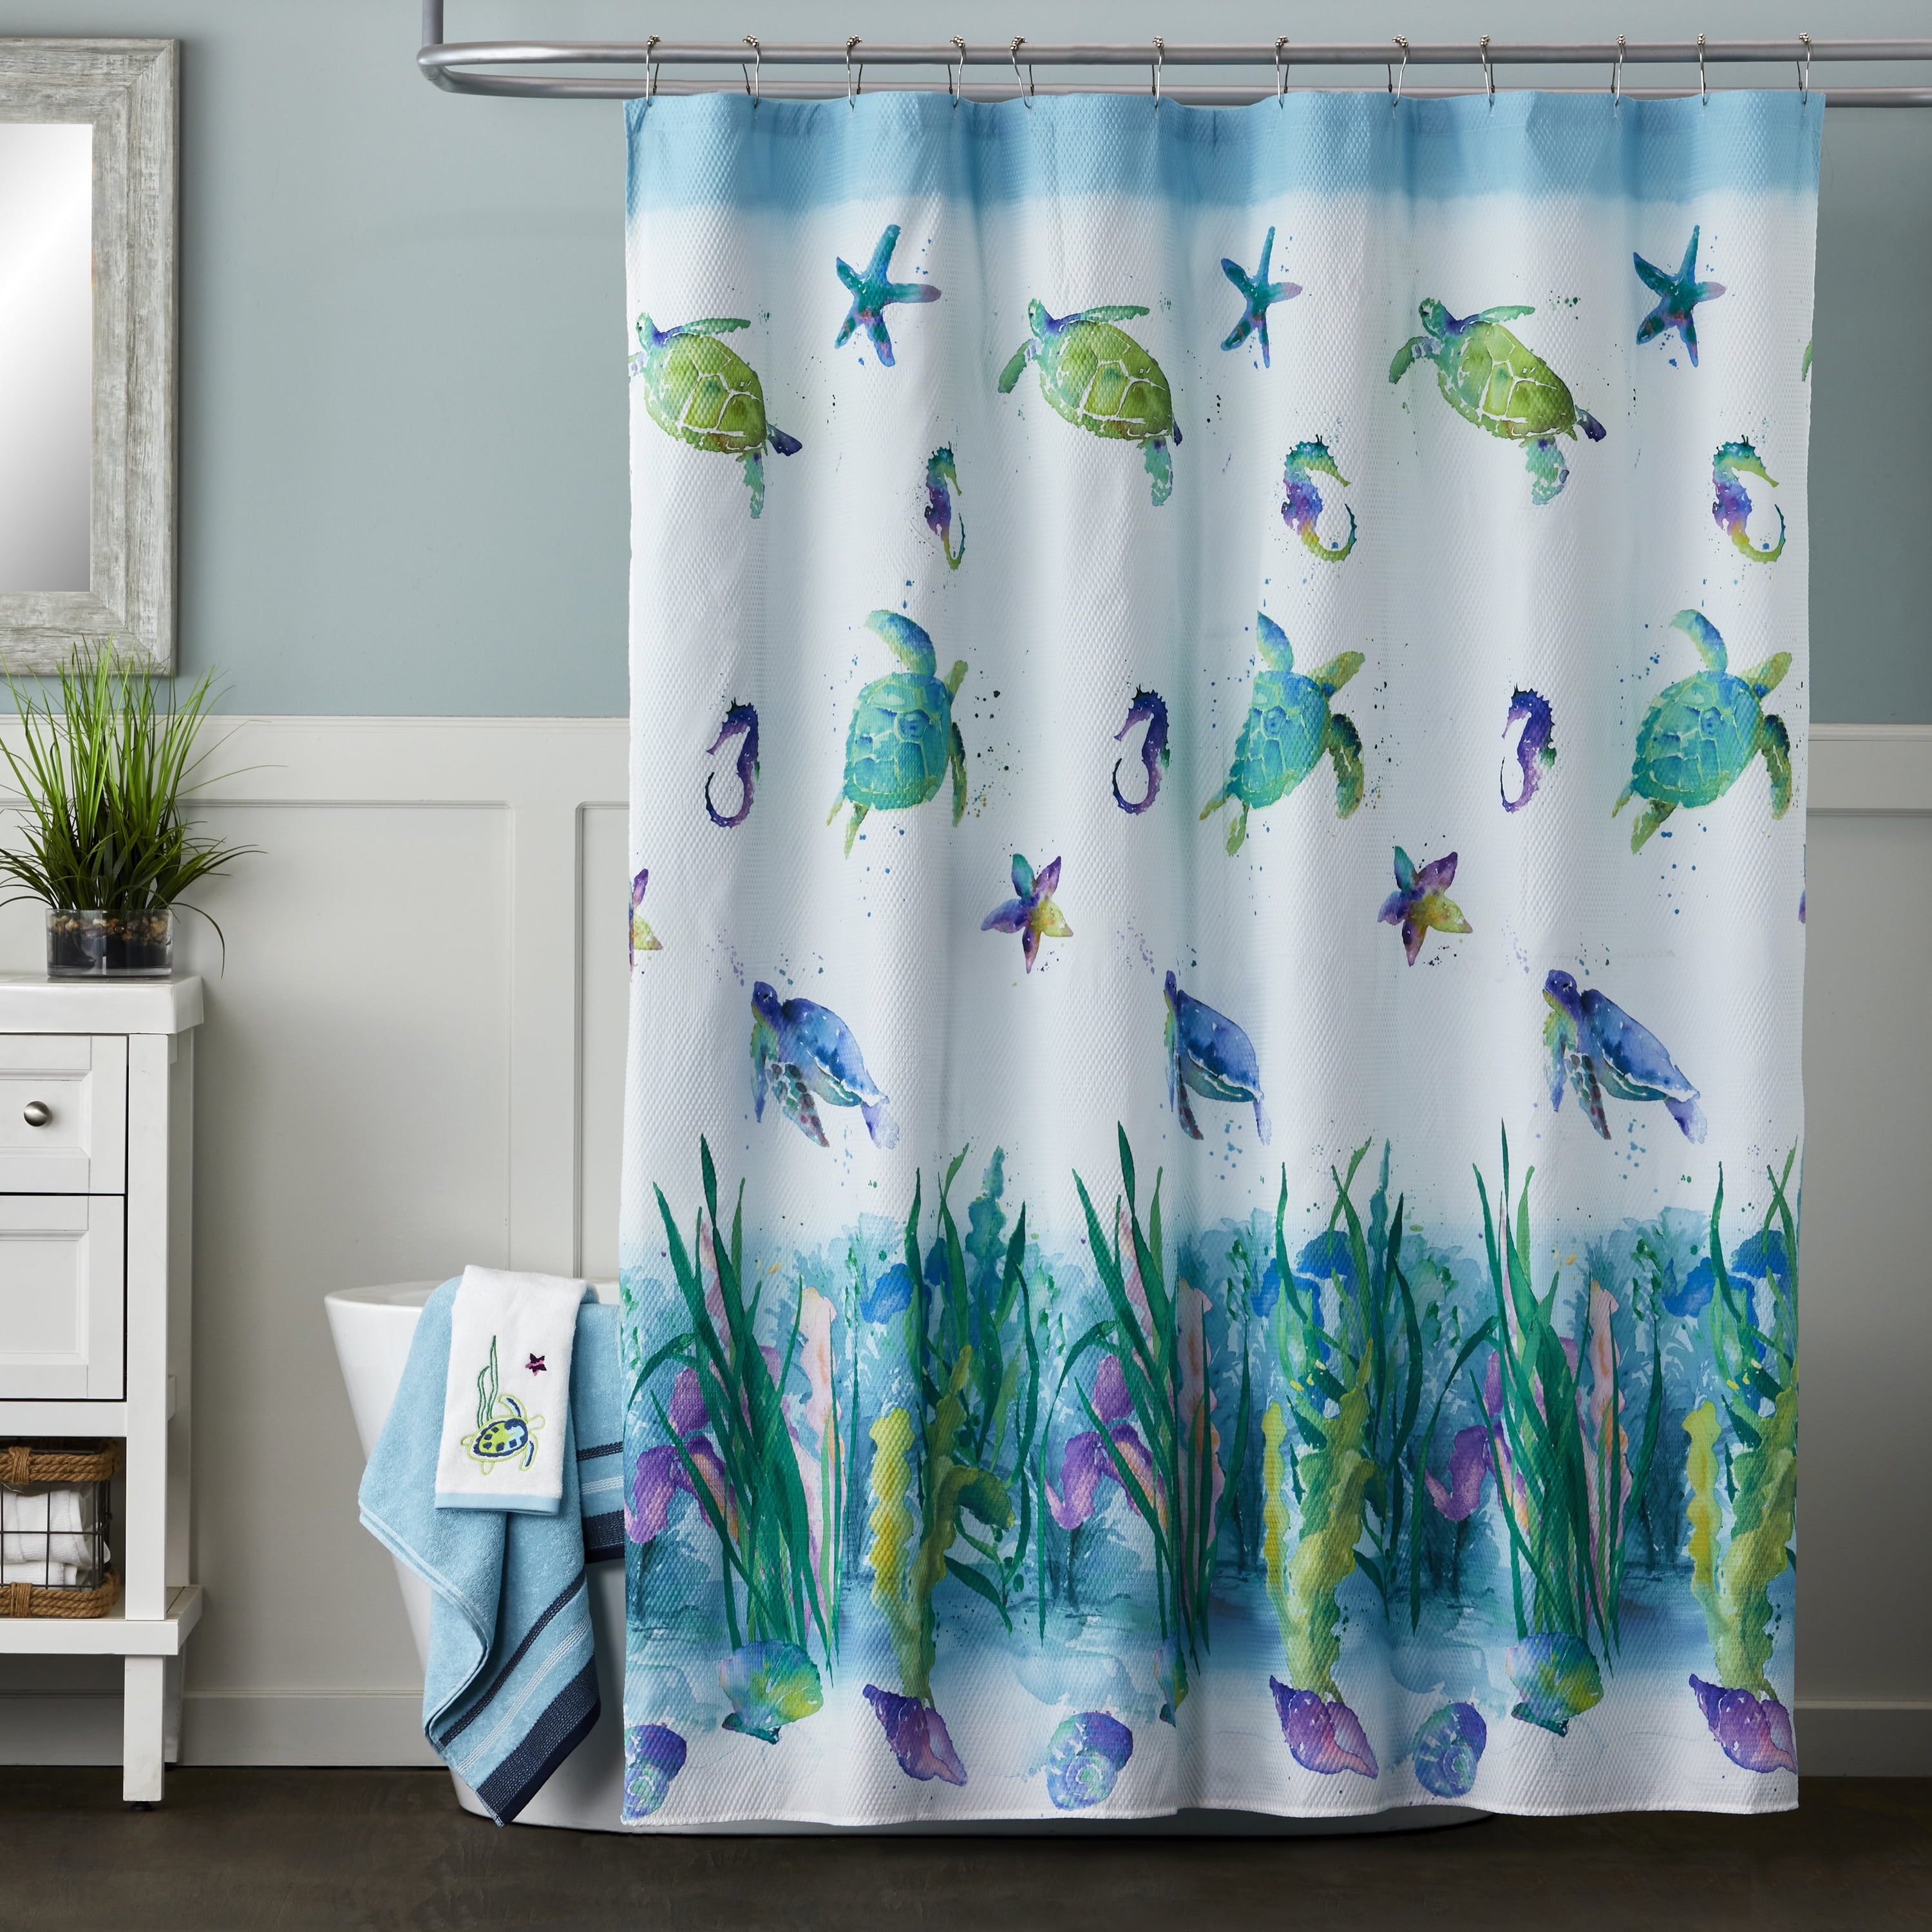 Shower Curtain Butterfly Watercolor Painting Style Colorful 70 Inches Long 8681273458518 